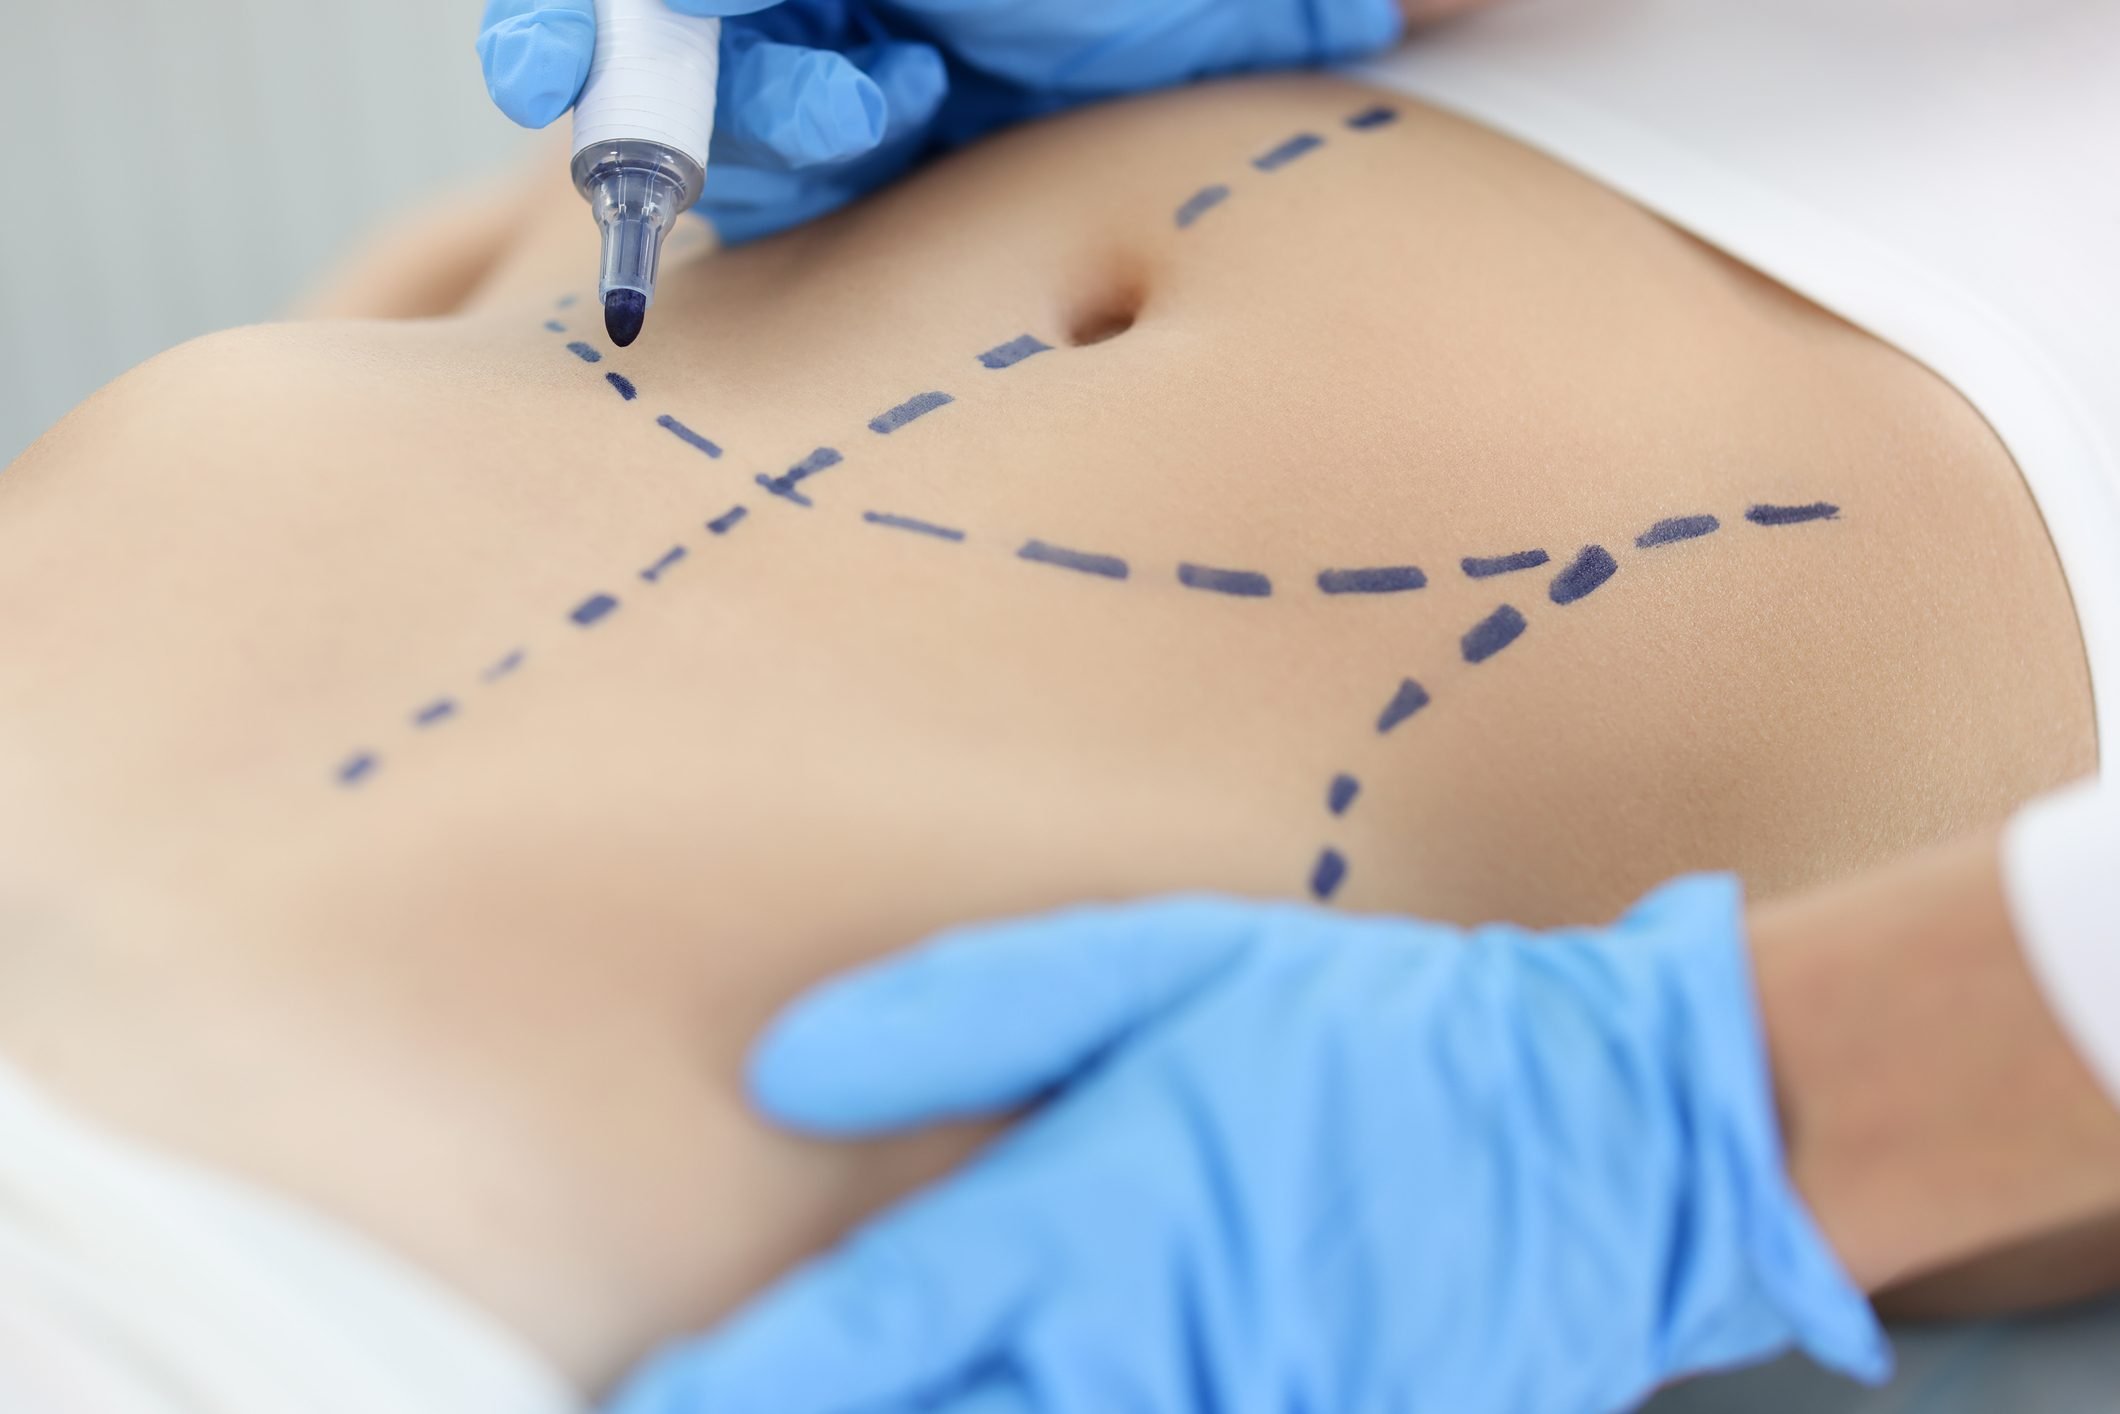 This Cosmetic Procedure Just Overtook Breast Augmentation As #1 in America